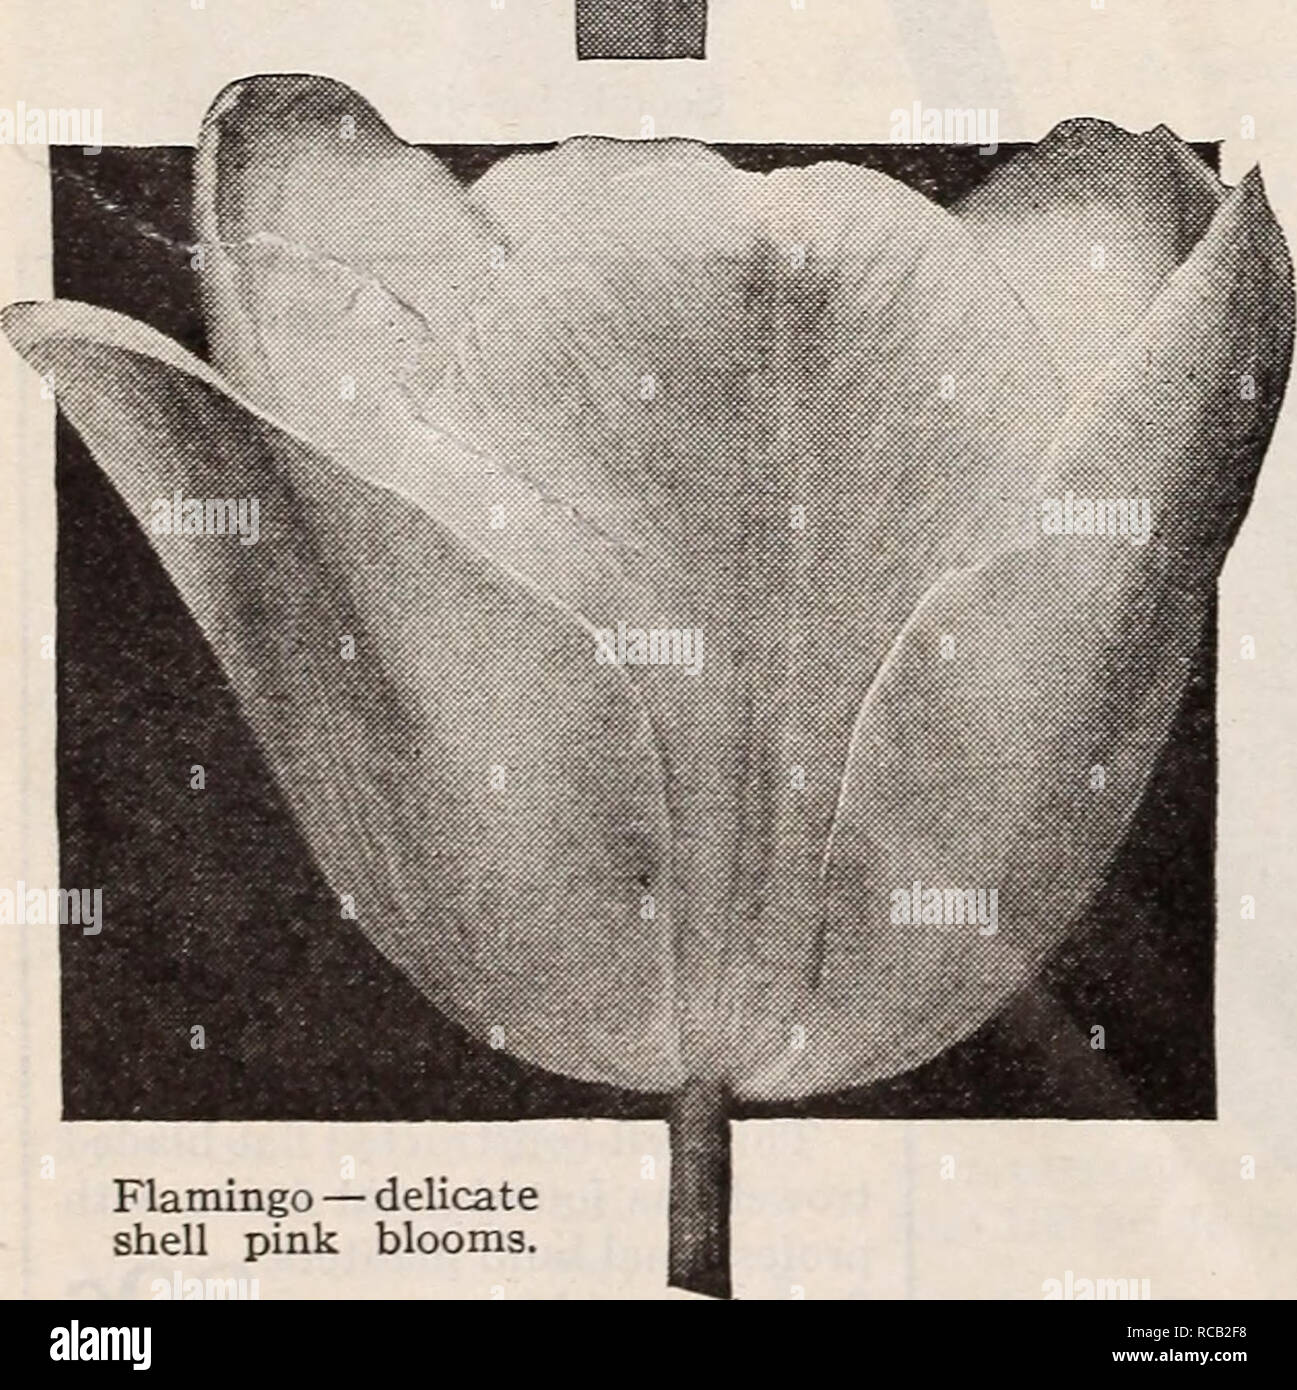 . Dreer's bulbs plants, shrubs and seeds for fall planting : autumn 1937. Bulbs (Plants) Catalogs; Flowers Seeds Catalogs; Gardening Equipment and supplies Catalogs; Nurseries (Horticulture) Catalogs; Vegetables Seeds Catalogs. Dream — soft rosy mauve on heliotrope ground with silvery edge.. Flamingo — delicate shell pink blooms. Dreer's Bulbs are Top-Size as we believe that gardeners everywhere are best served by planting this large size. They produce the finest flowers and make a vigorous, strong growth. Dreer's Giant Glorious, Colorful Anton Mauve. A flower of graceful form, large size, and Stock Photo